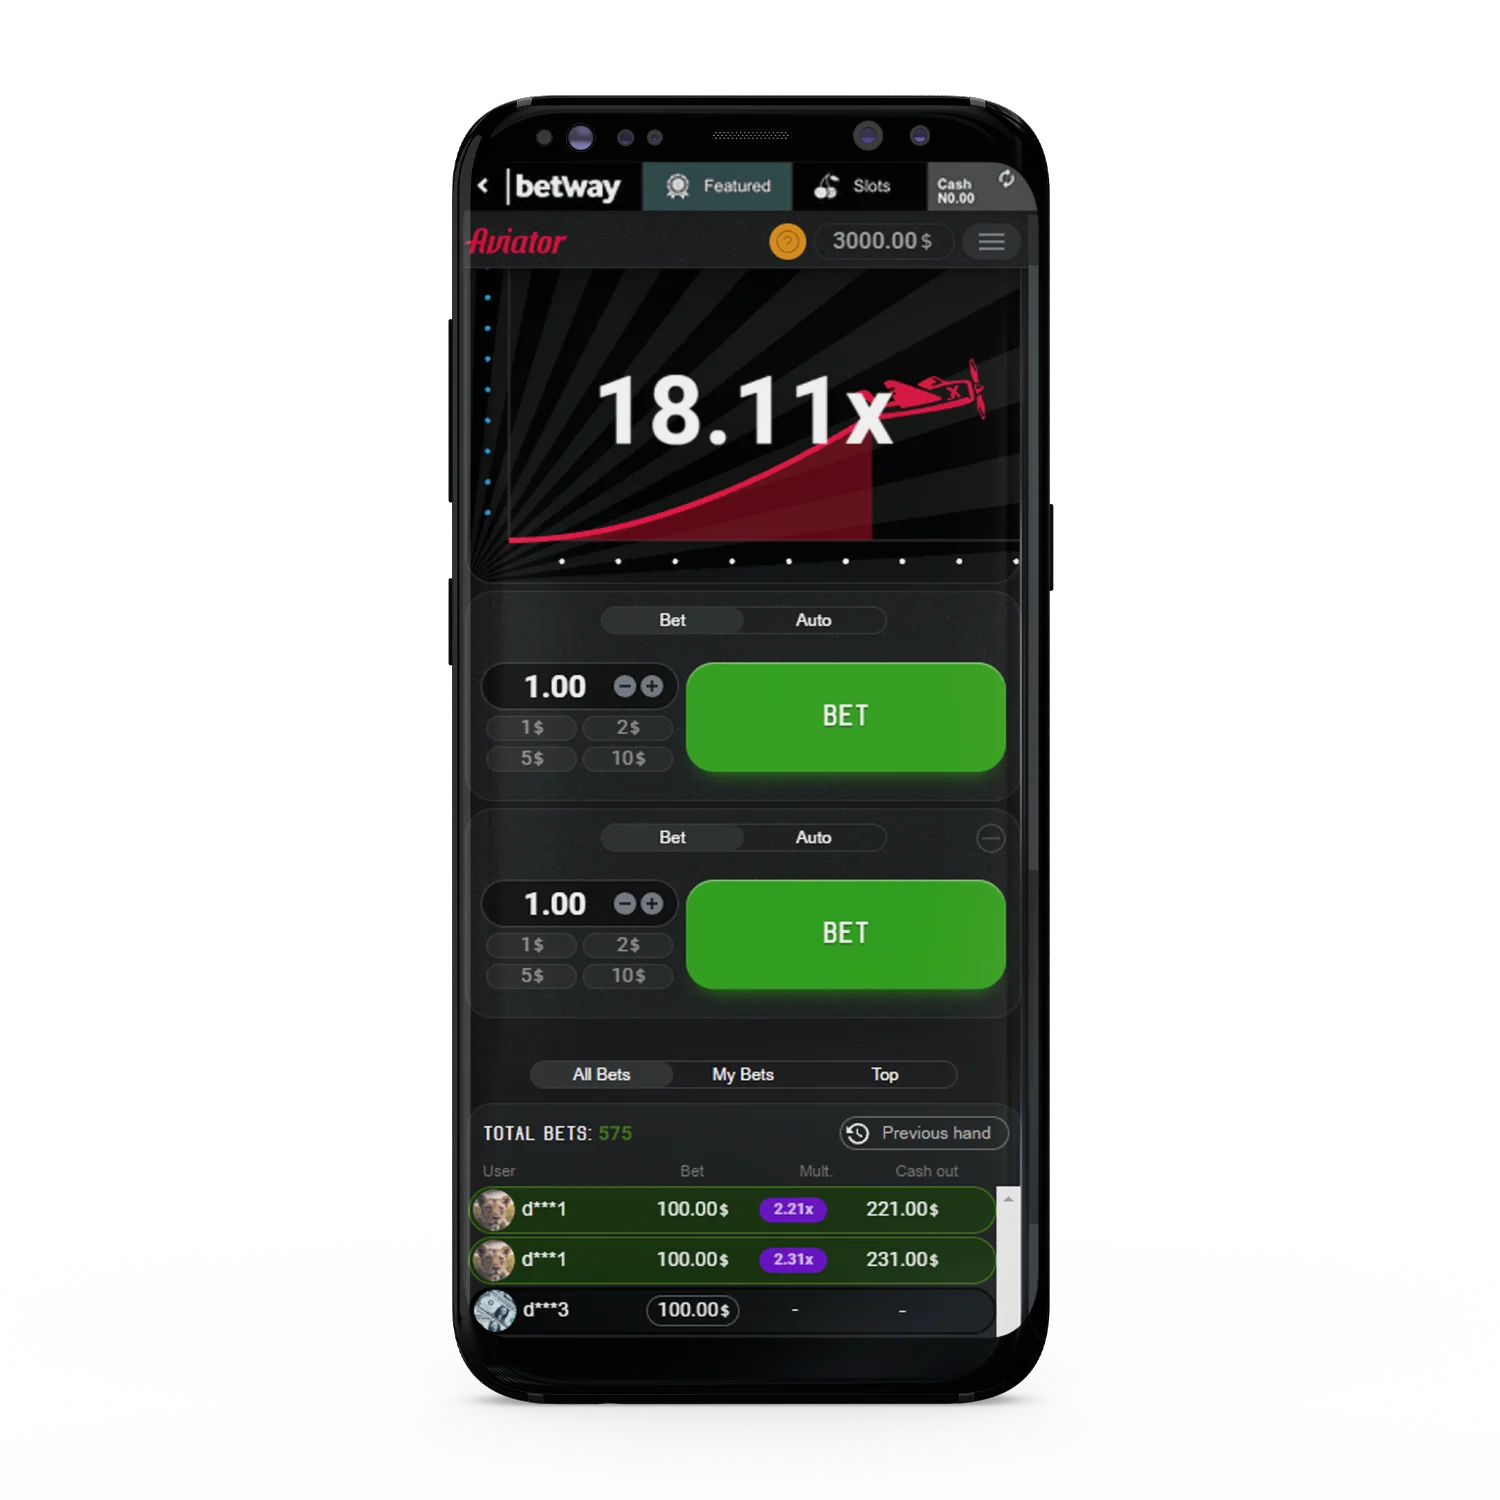 The Betway mobile app supports the Aviator game for Indian users.